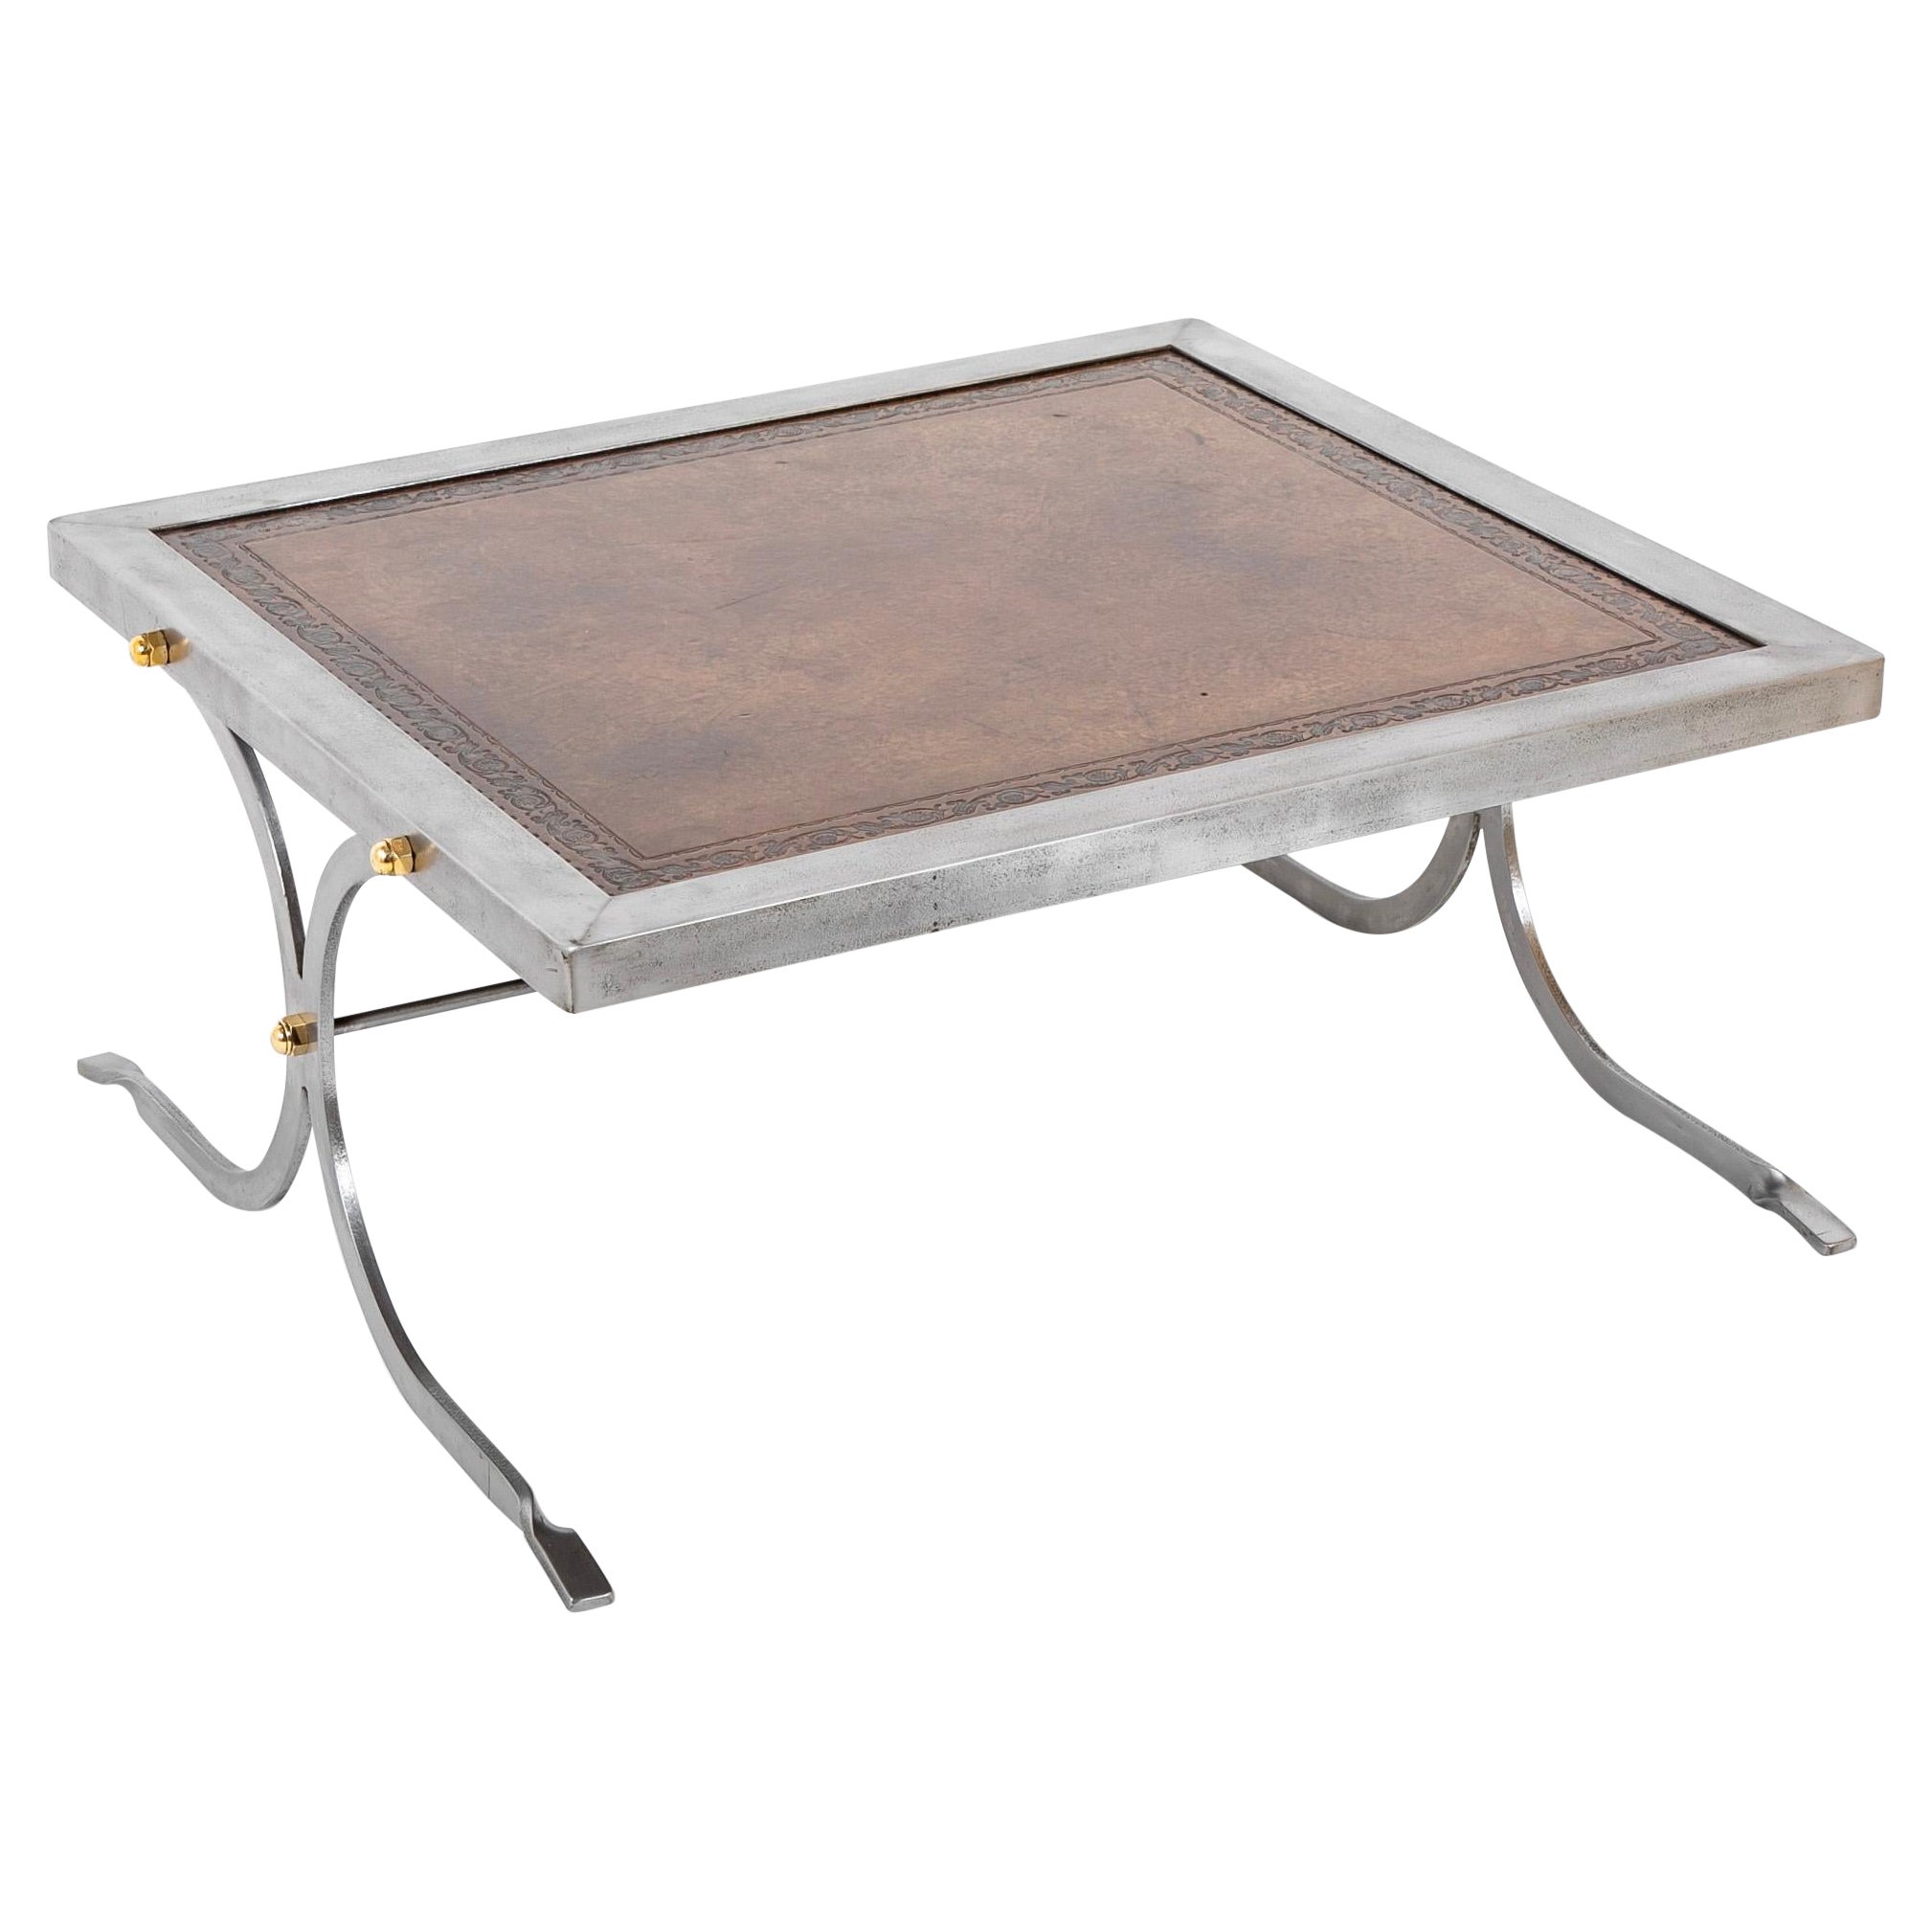 French Maison Jansen Style Polished Steel, Brass and Leather Coffee Table For Sale